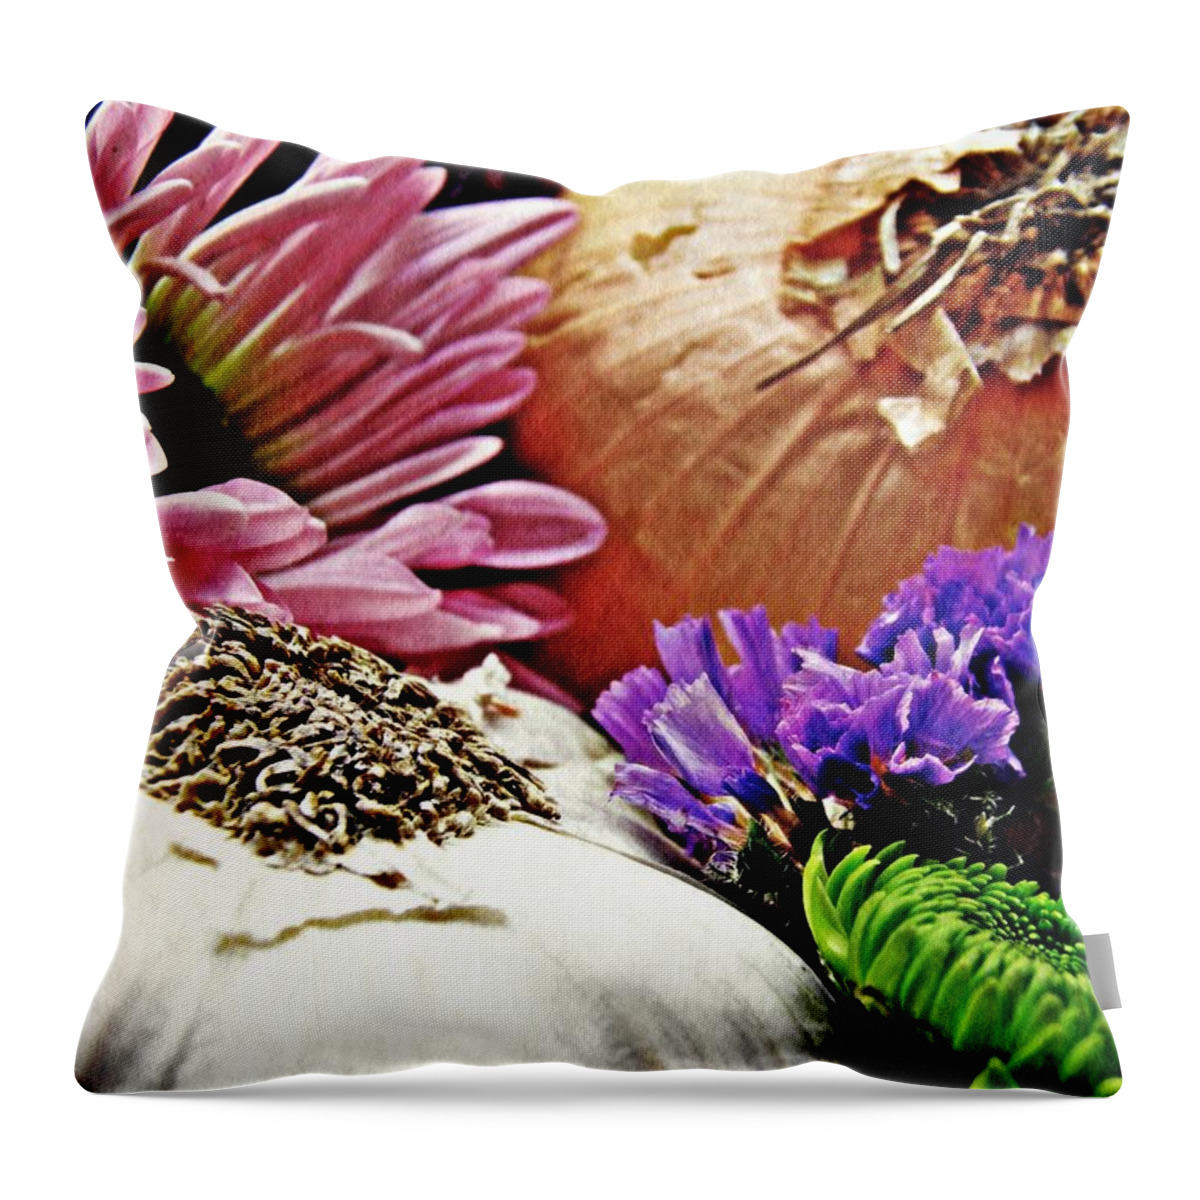 Garlic Throw Pillow featuring the photograph Flavored with Onion and Garlic by Sarah Loft